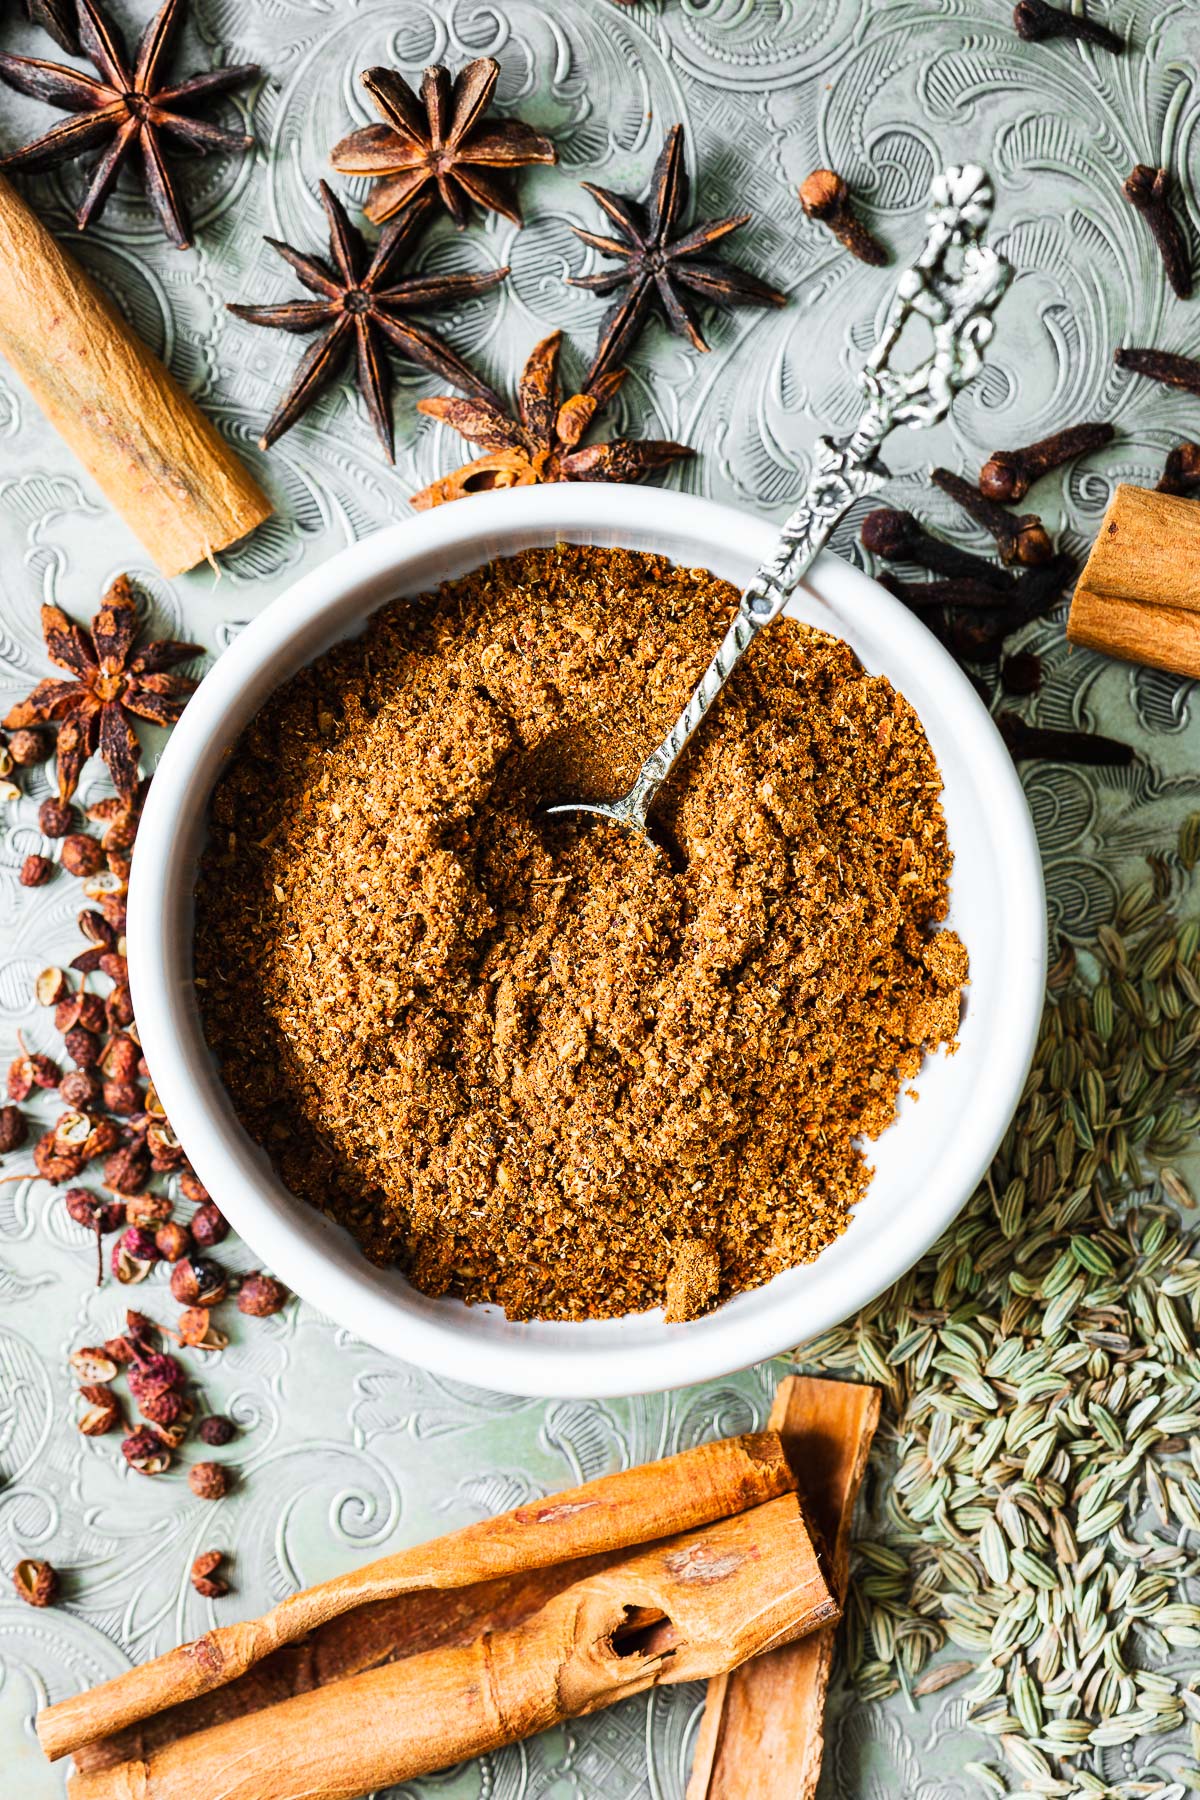 Homemade Chinese five-spice substitute with Chinese cinnamon, star anise pods, fennel seeds, Sichuan peppercorns and cloves. The five-spice powder is in a small bowl surrounded by spices.